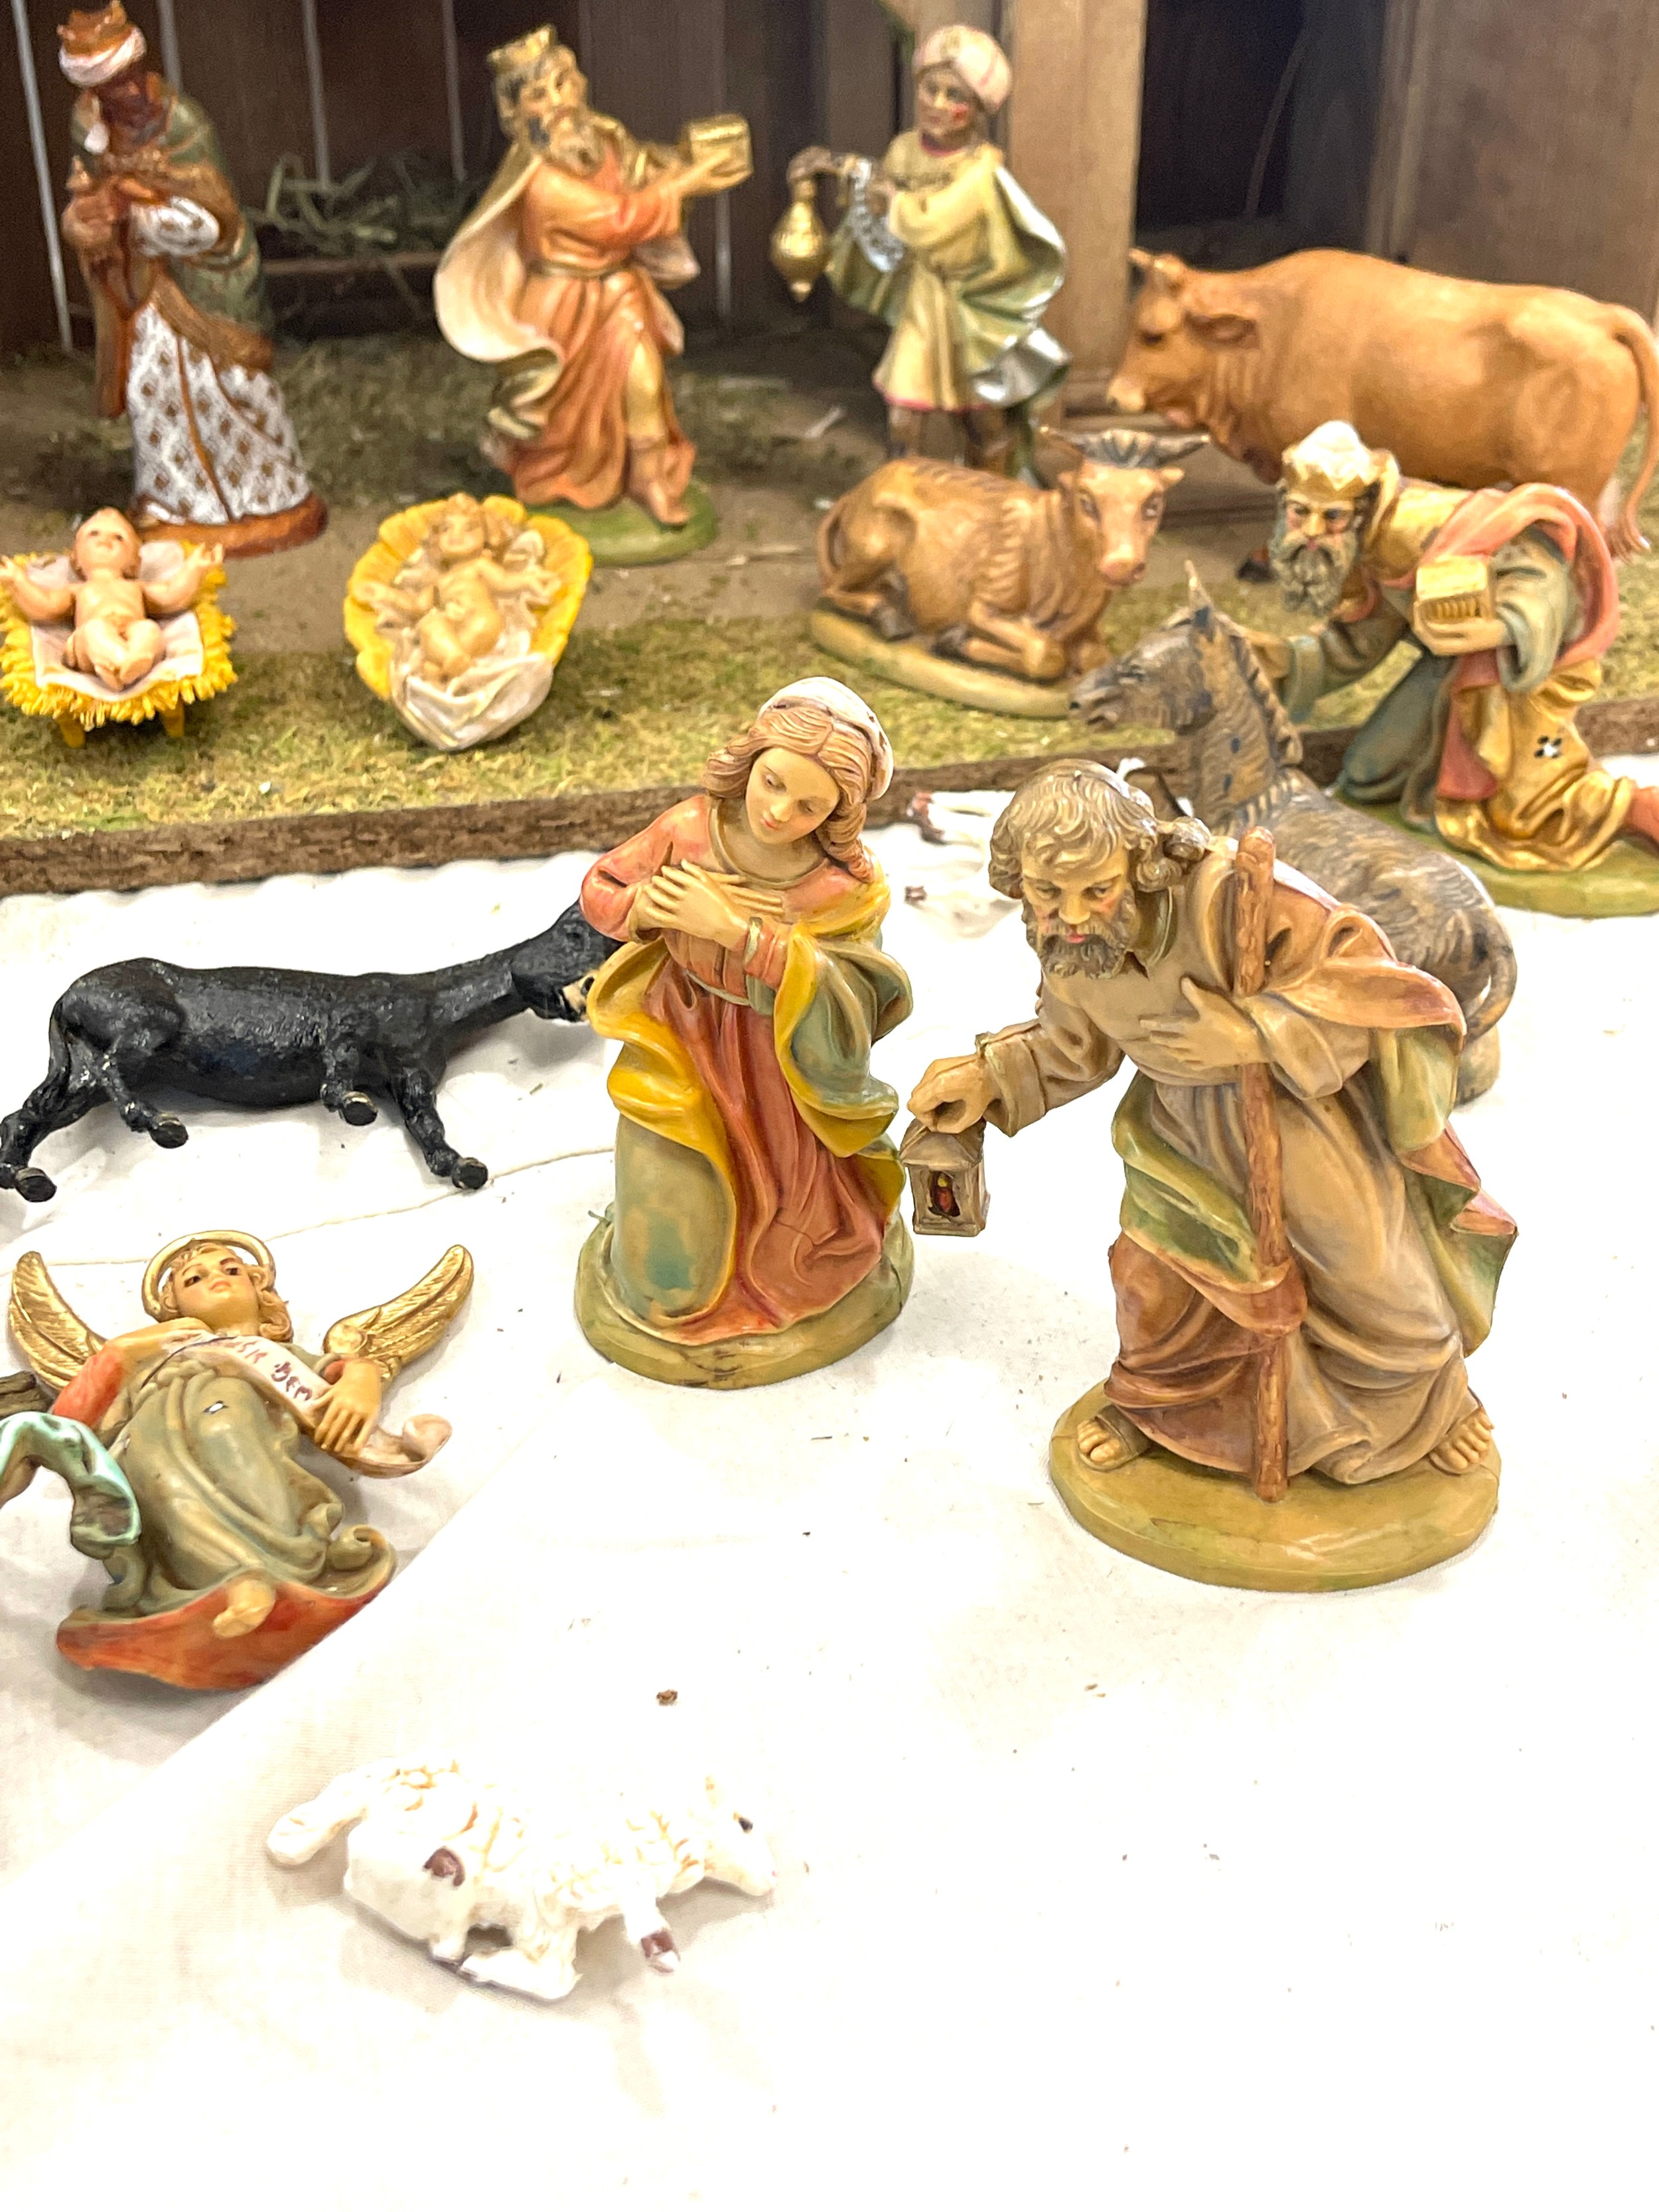 Handmade stable / manger with biblical figures, nativity scene figures by maker Landi Italy , - Image 3 of 6